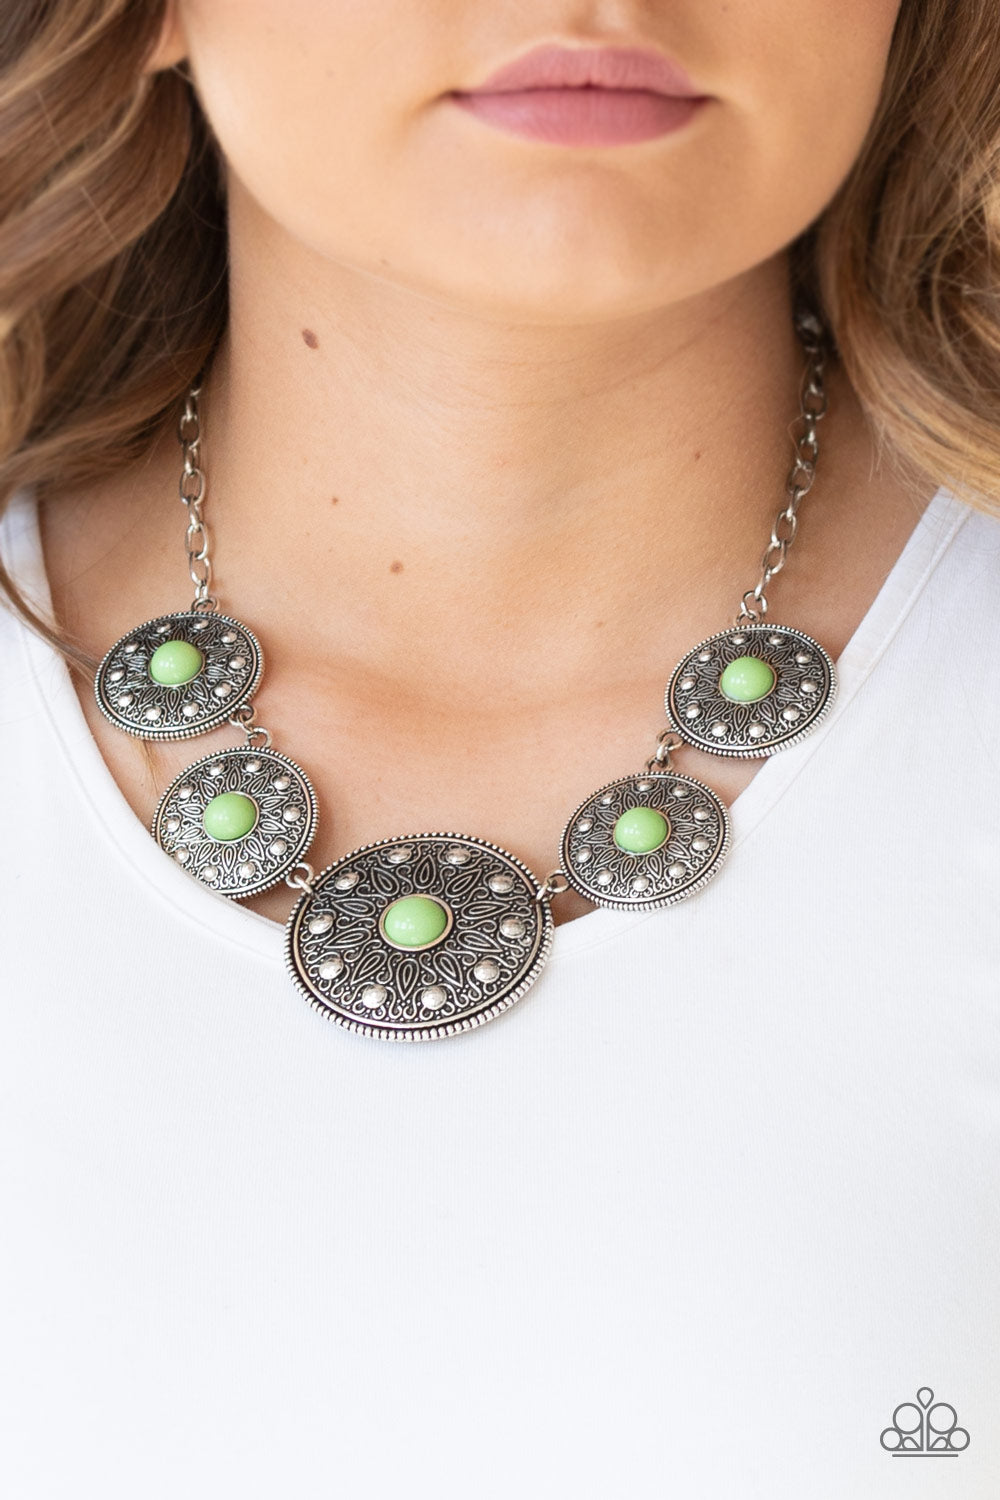 Paparazzi necklace - Hey, SOL Sister - Green